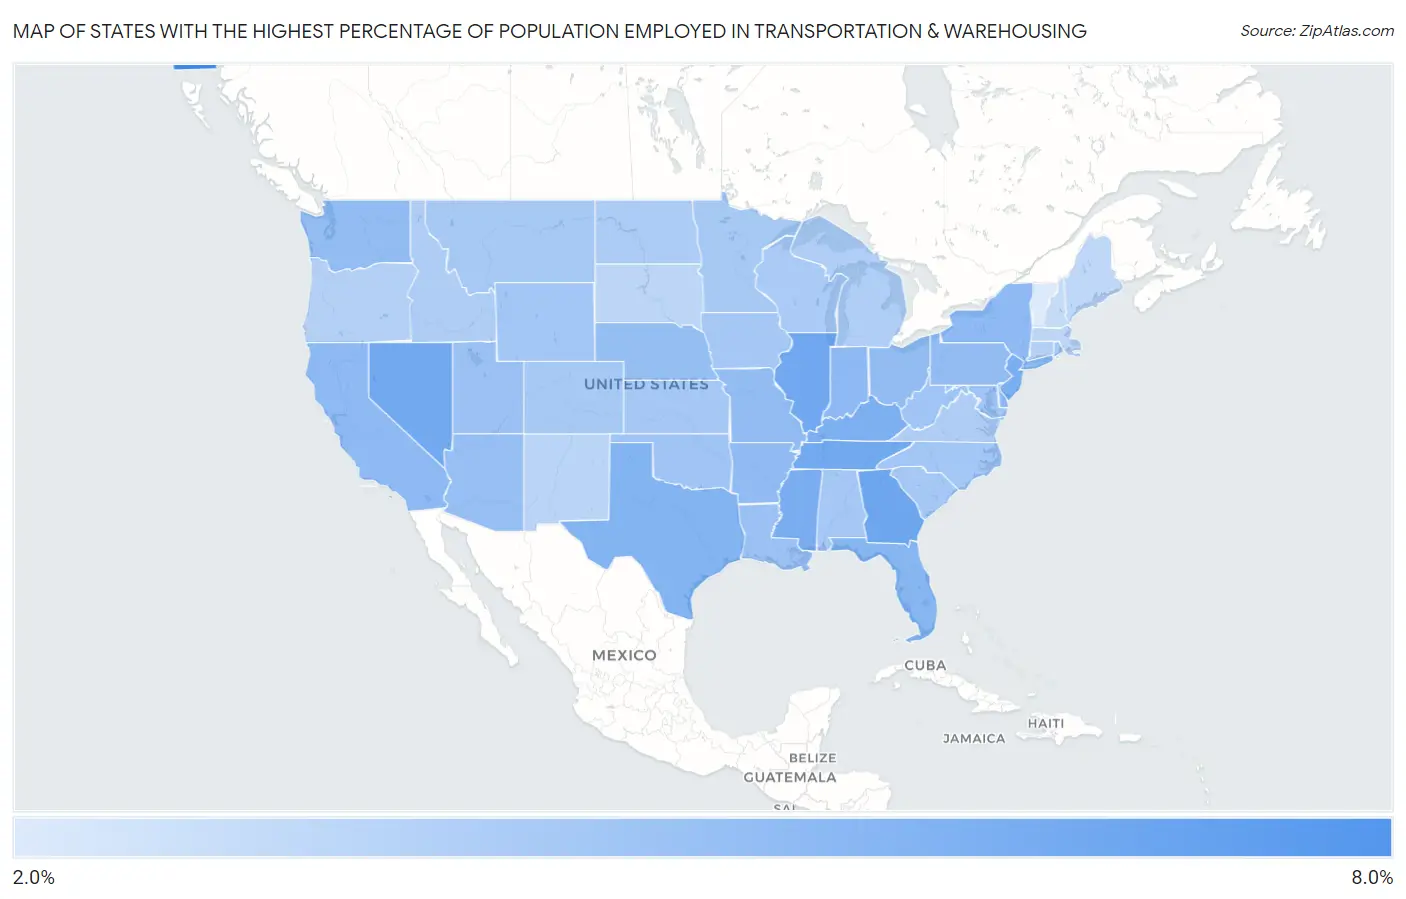 States with the Highest Percentage of Population Employed in Transportation & Warehousing in the United States Map